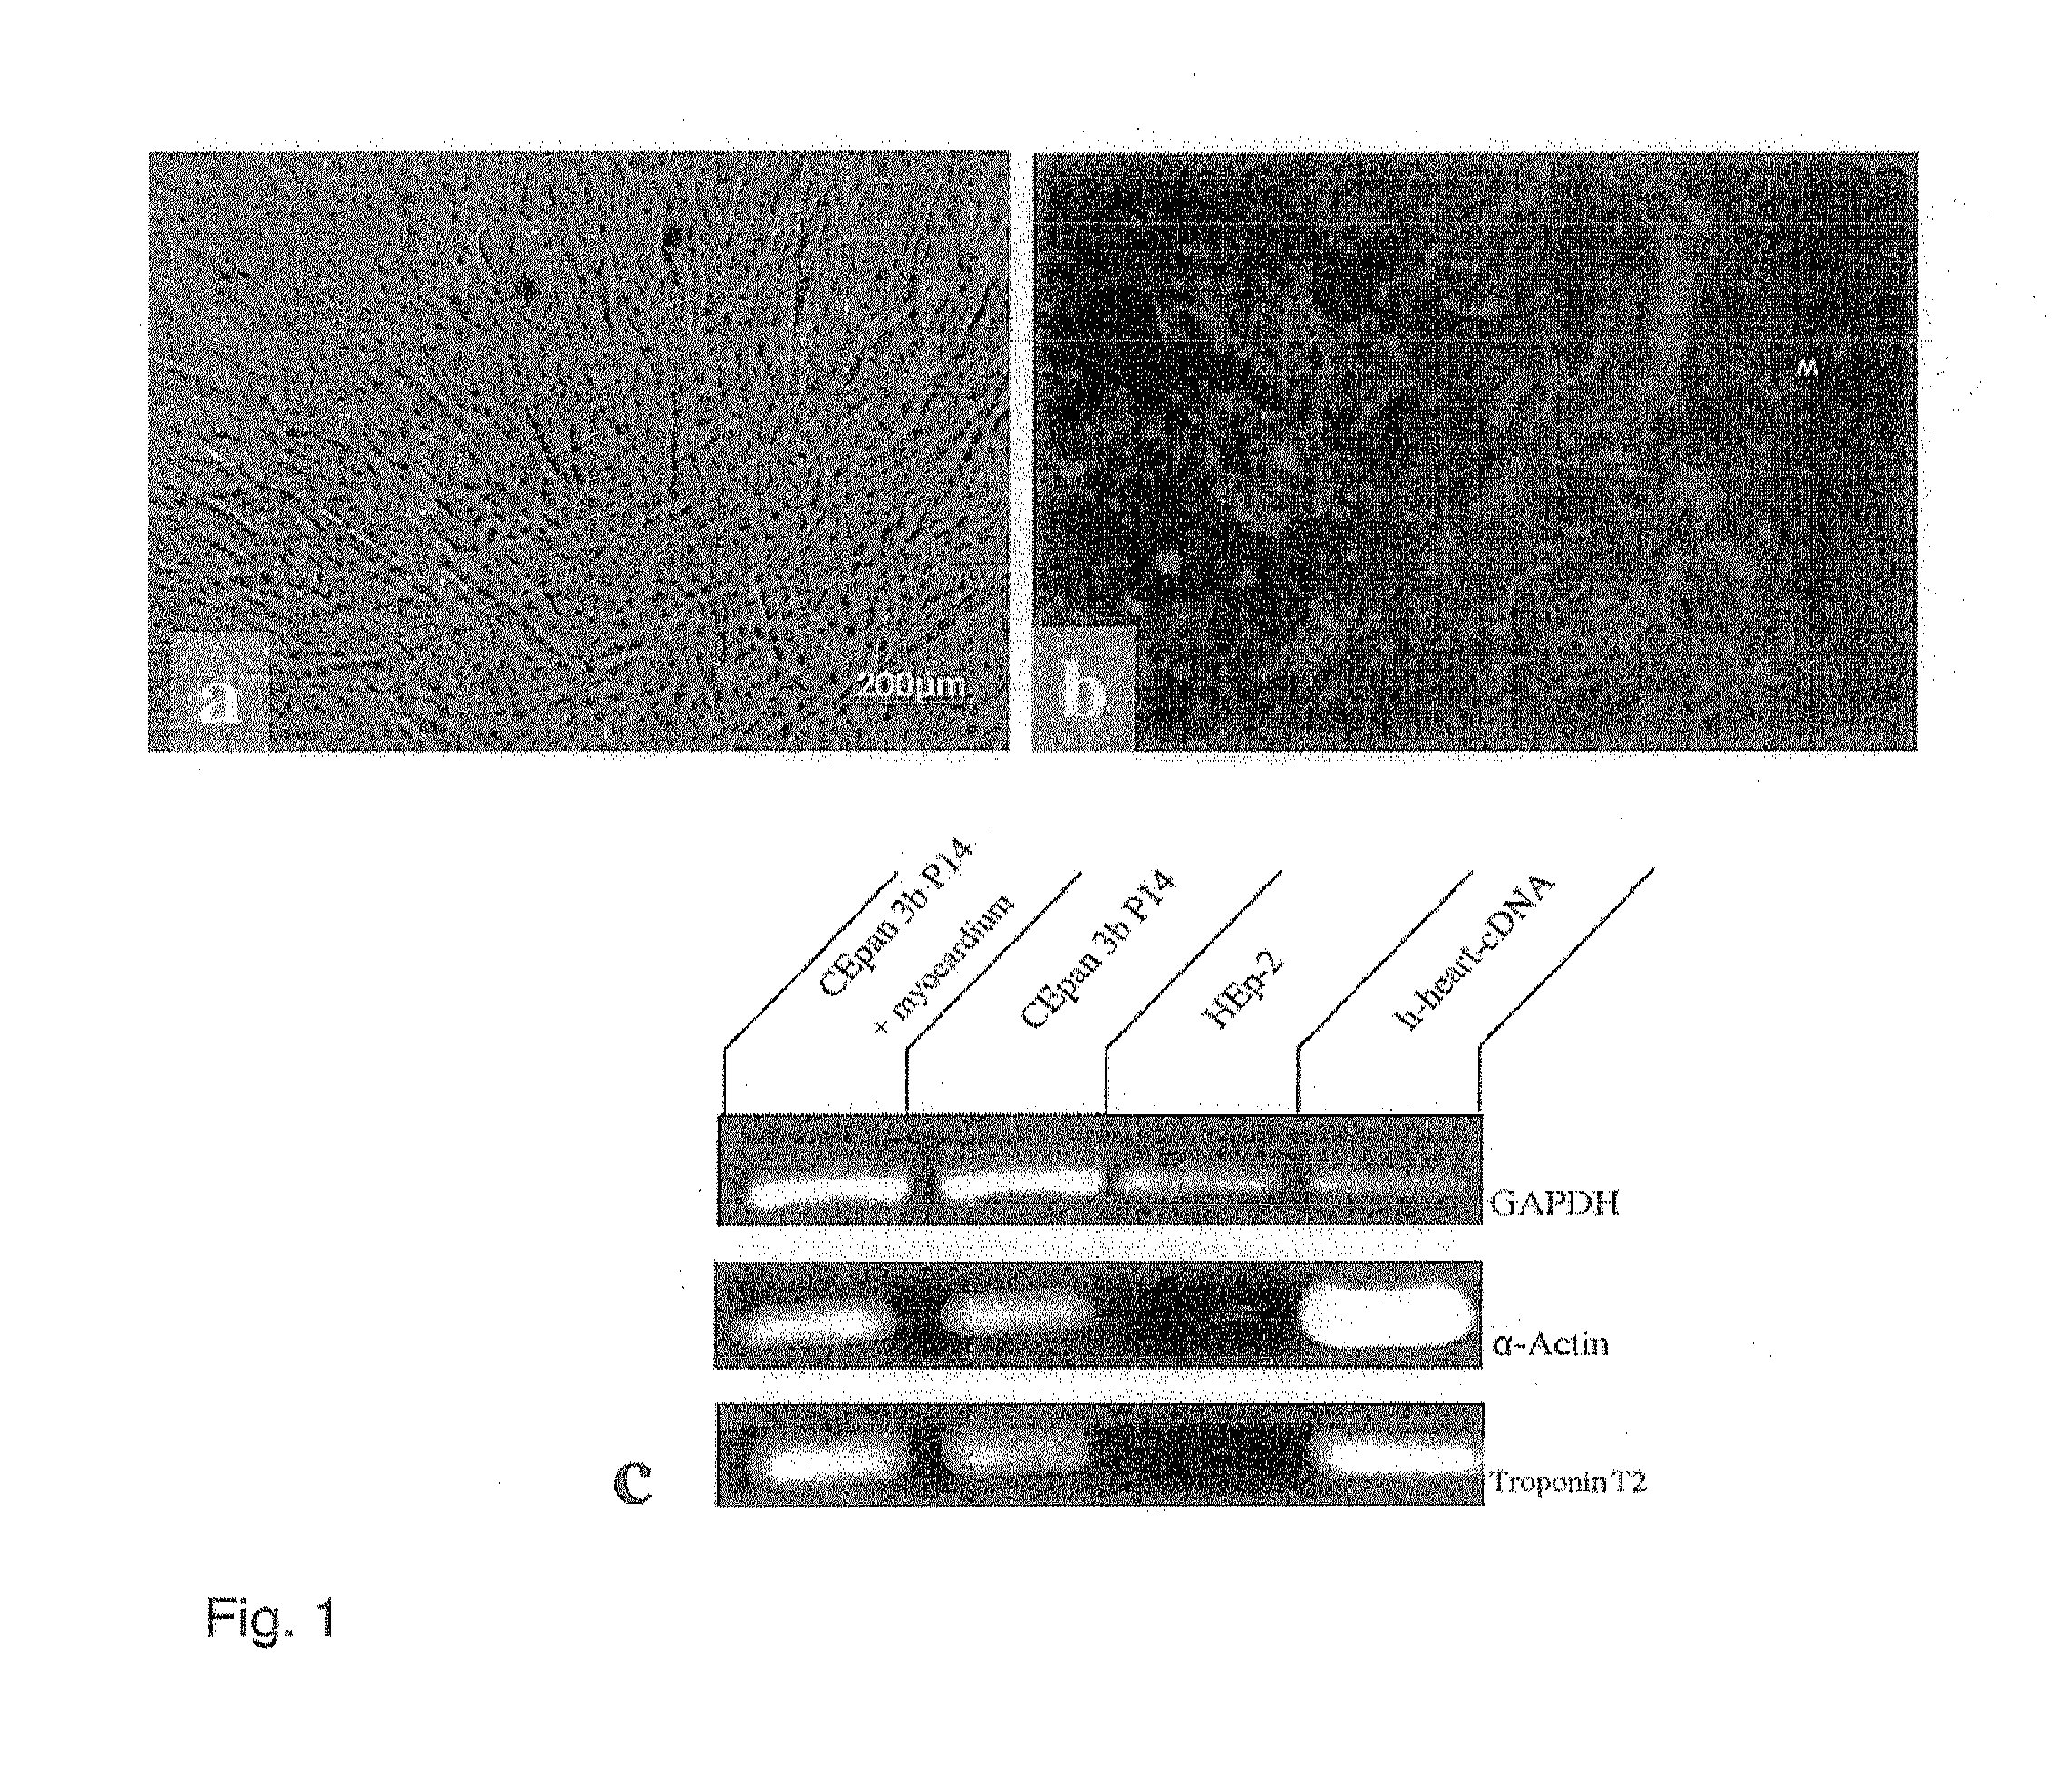 Method for producing autonomously contracting cardiac muscle cells from adult stem cells, in particular human adult stem cells